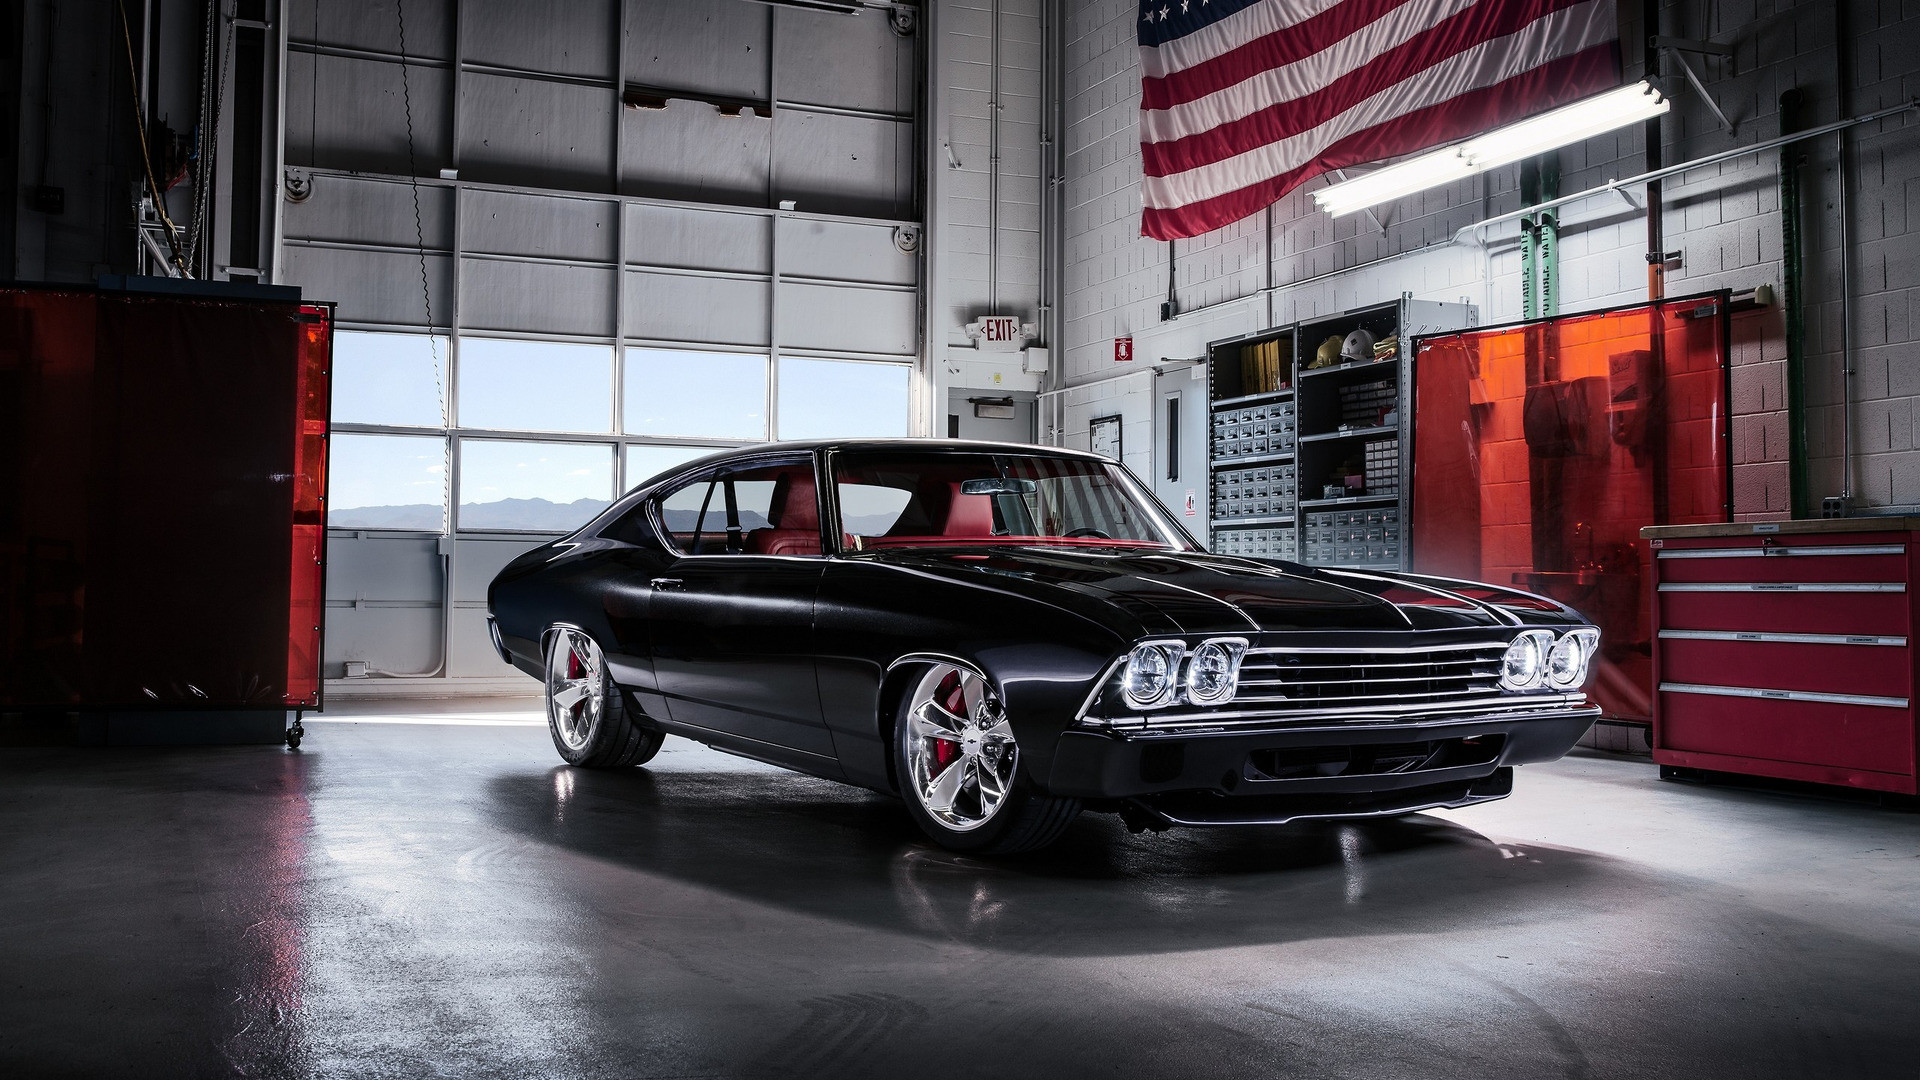 Chevy Chevelle Slammer concept blends retro styling with modern hardware